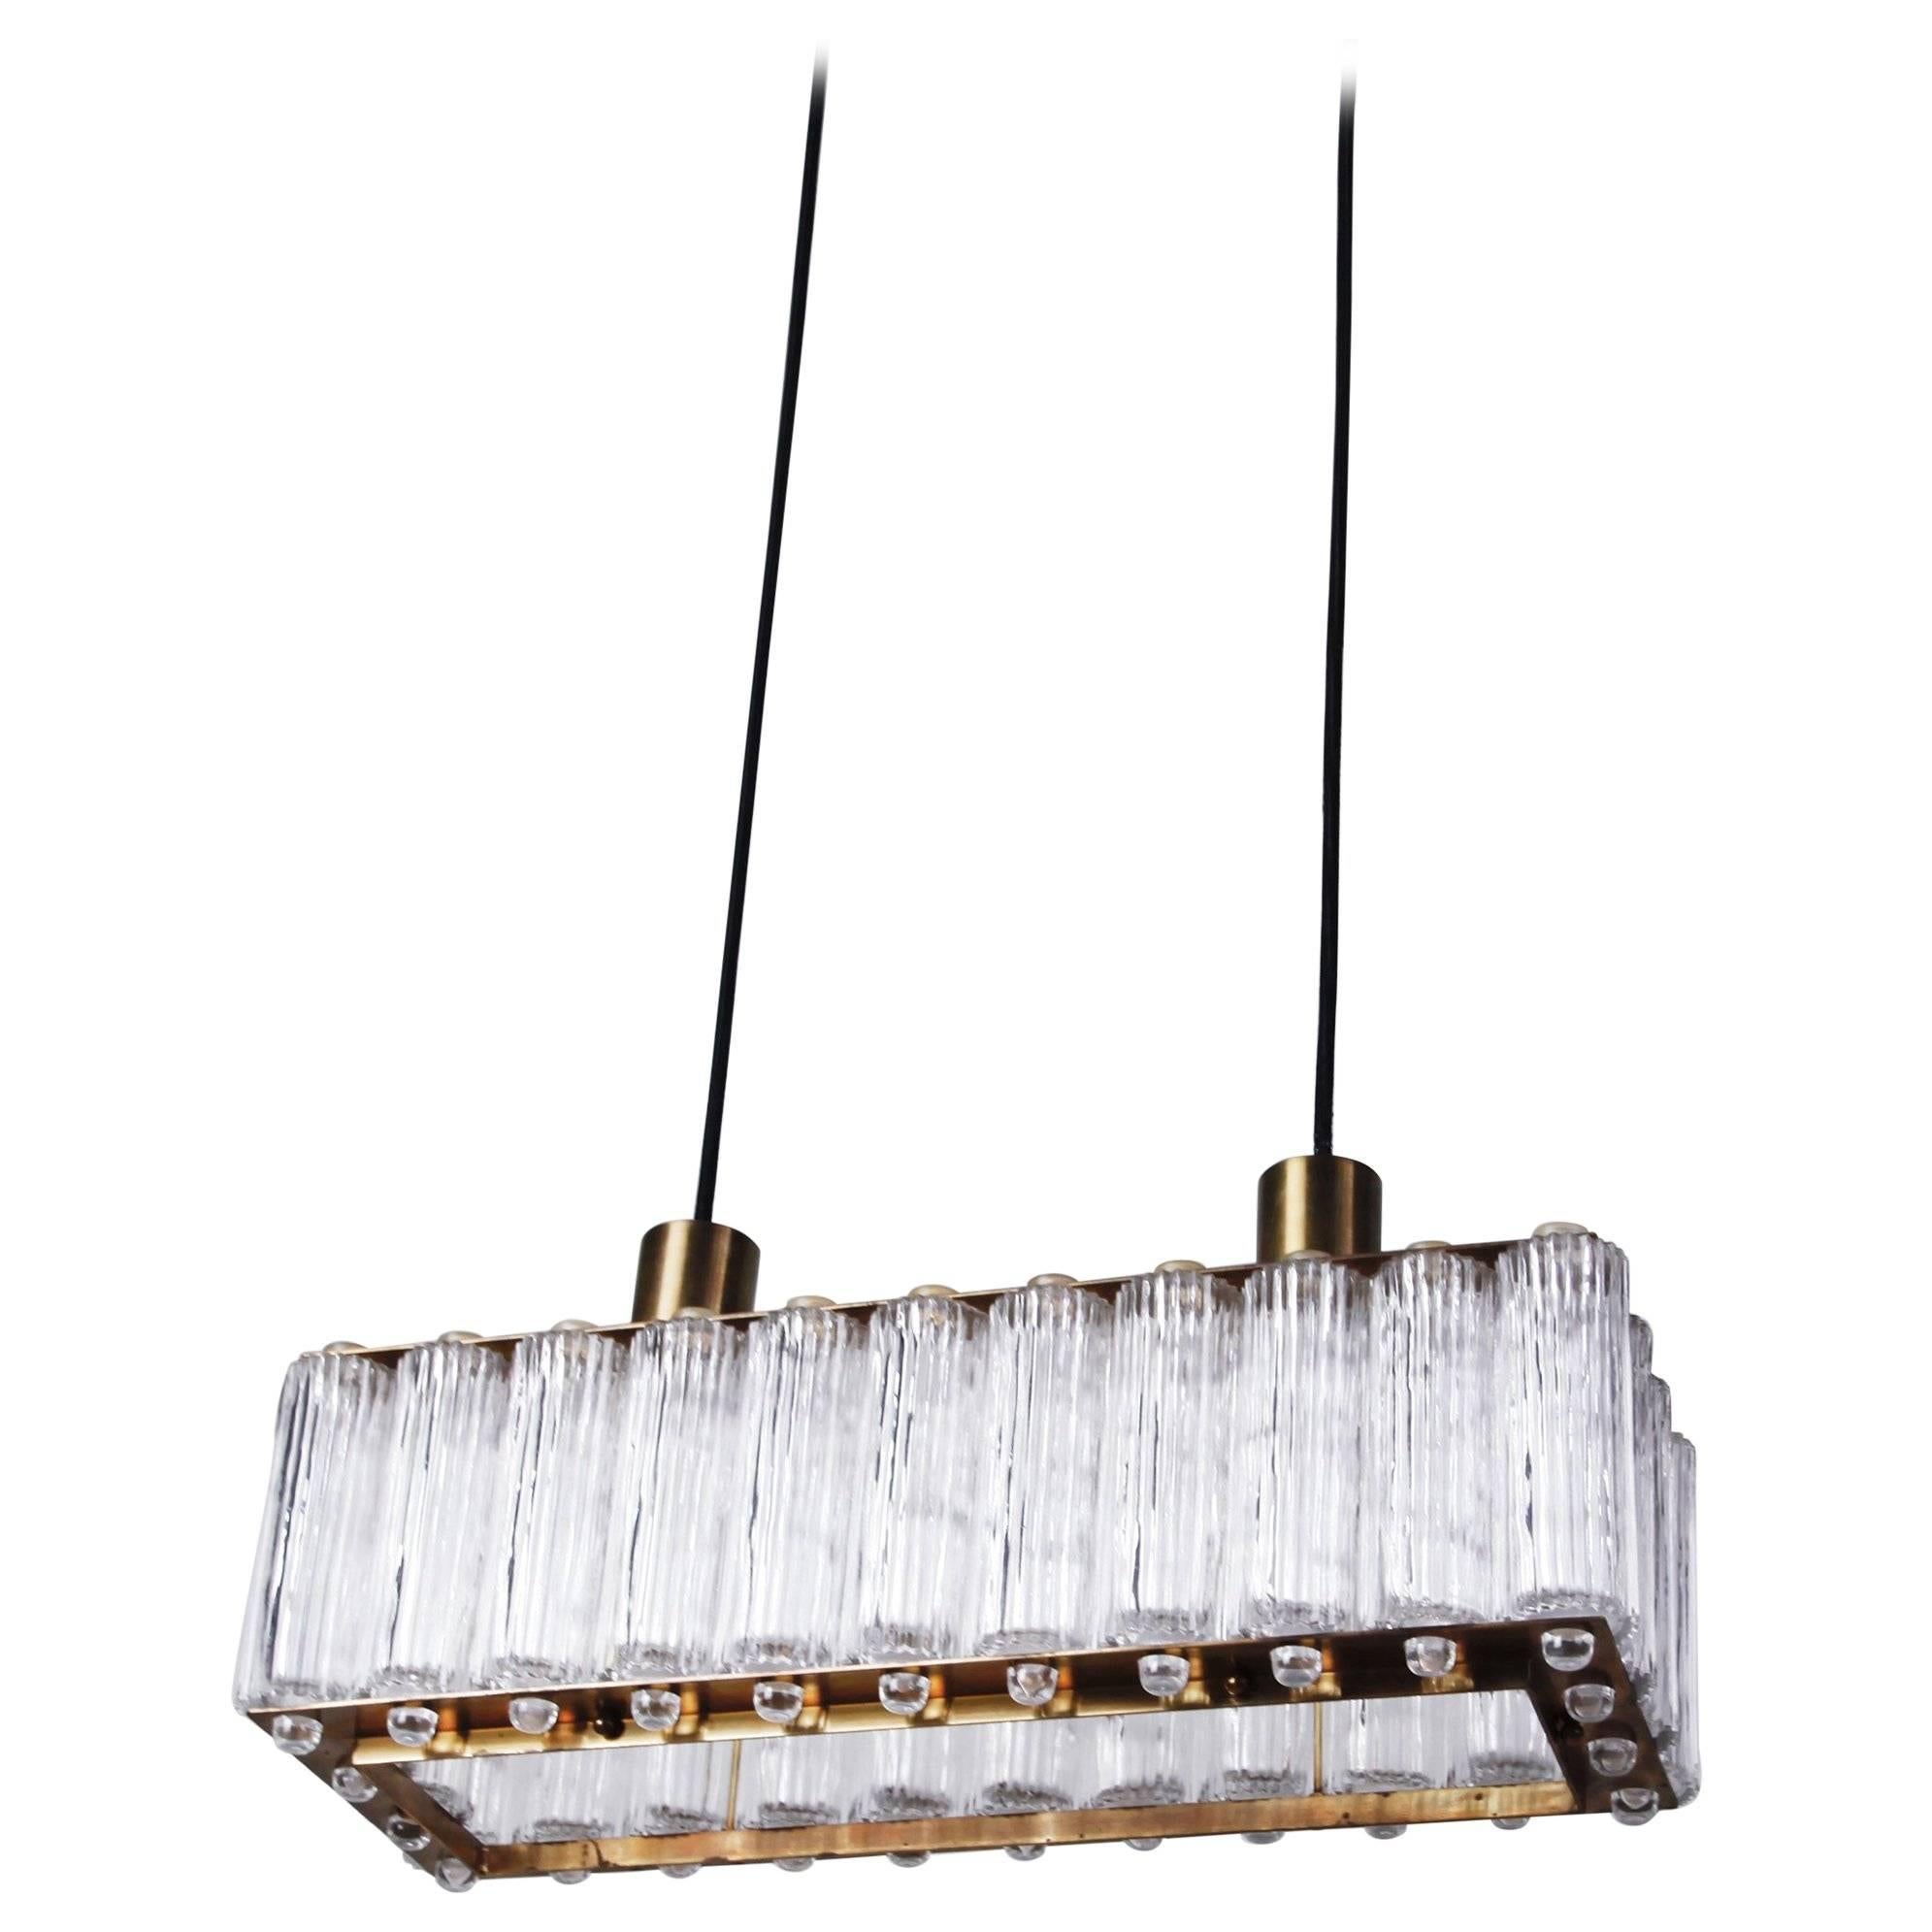 This pendant lamp is one profile in a line called 